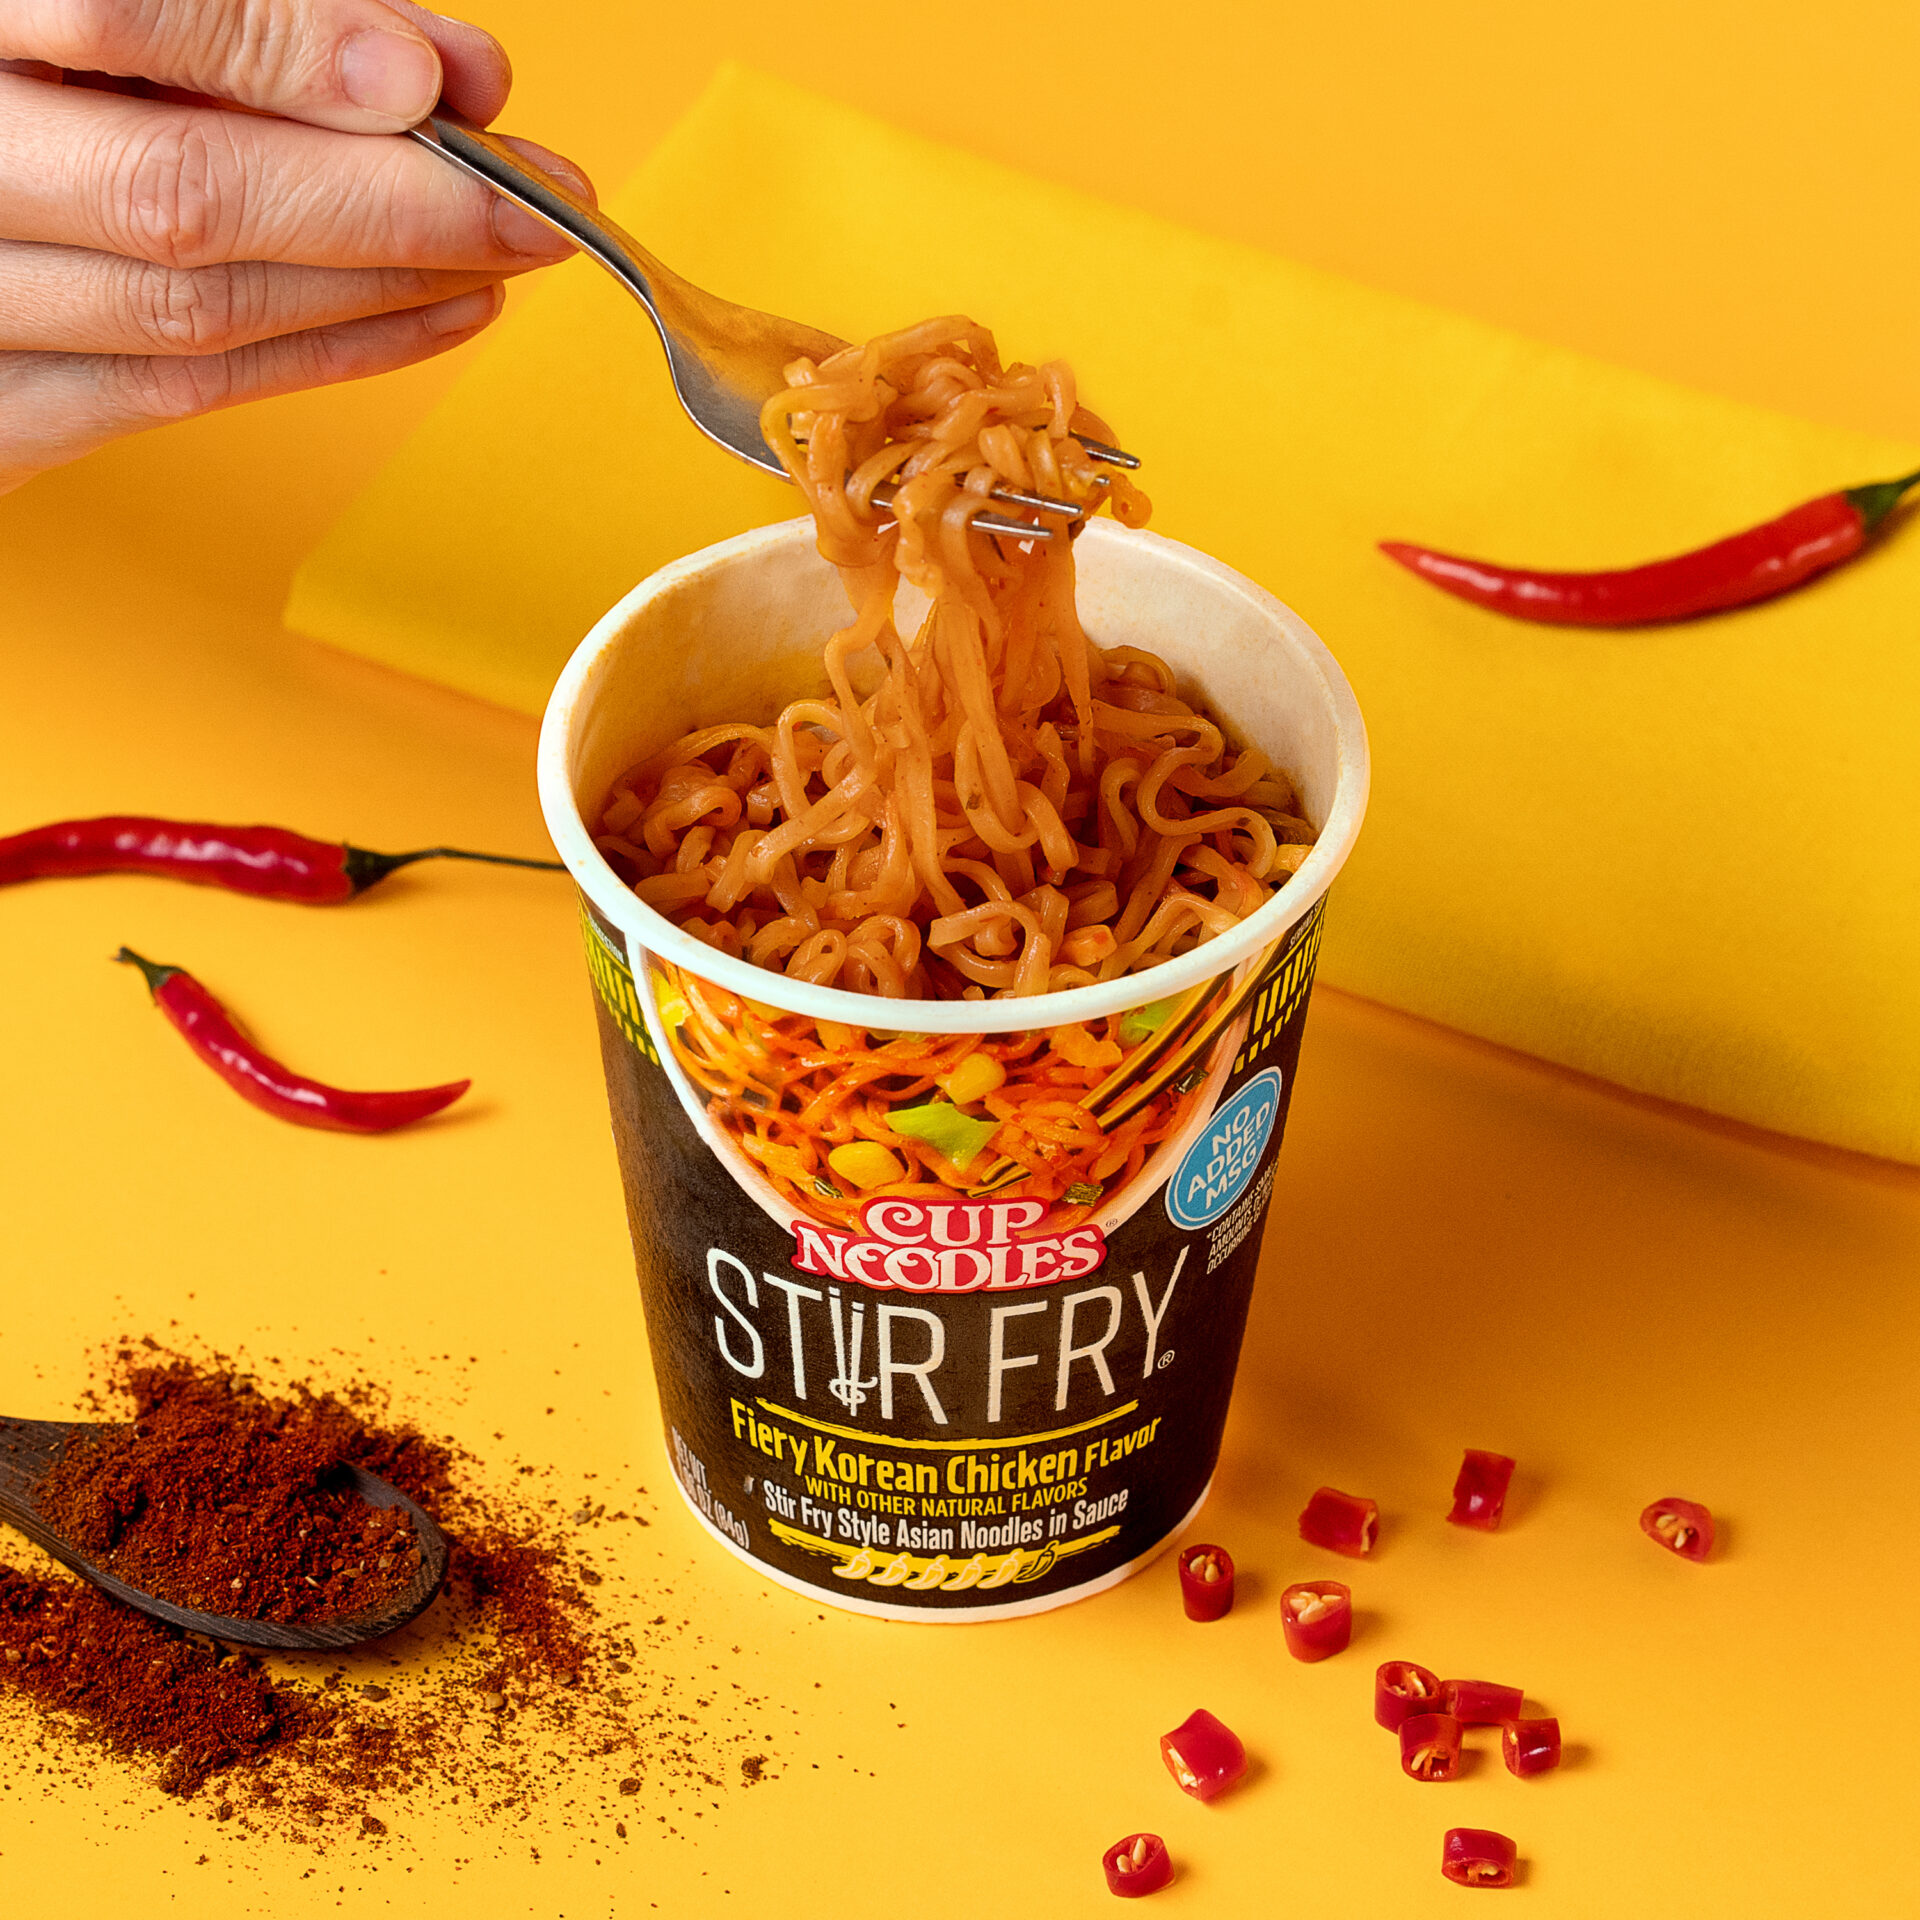 https://www.nissinfoods.com/wp-content/uploads/2023/03/23_NISSIN_Content_Product_CN_SF_FieryKoreanChicken_SM_X2_0135_retouched_R1V1_3000x3000.jpg